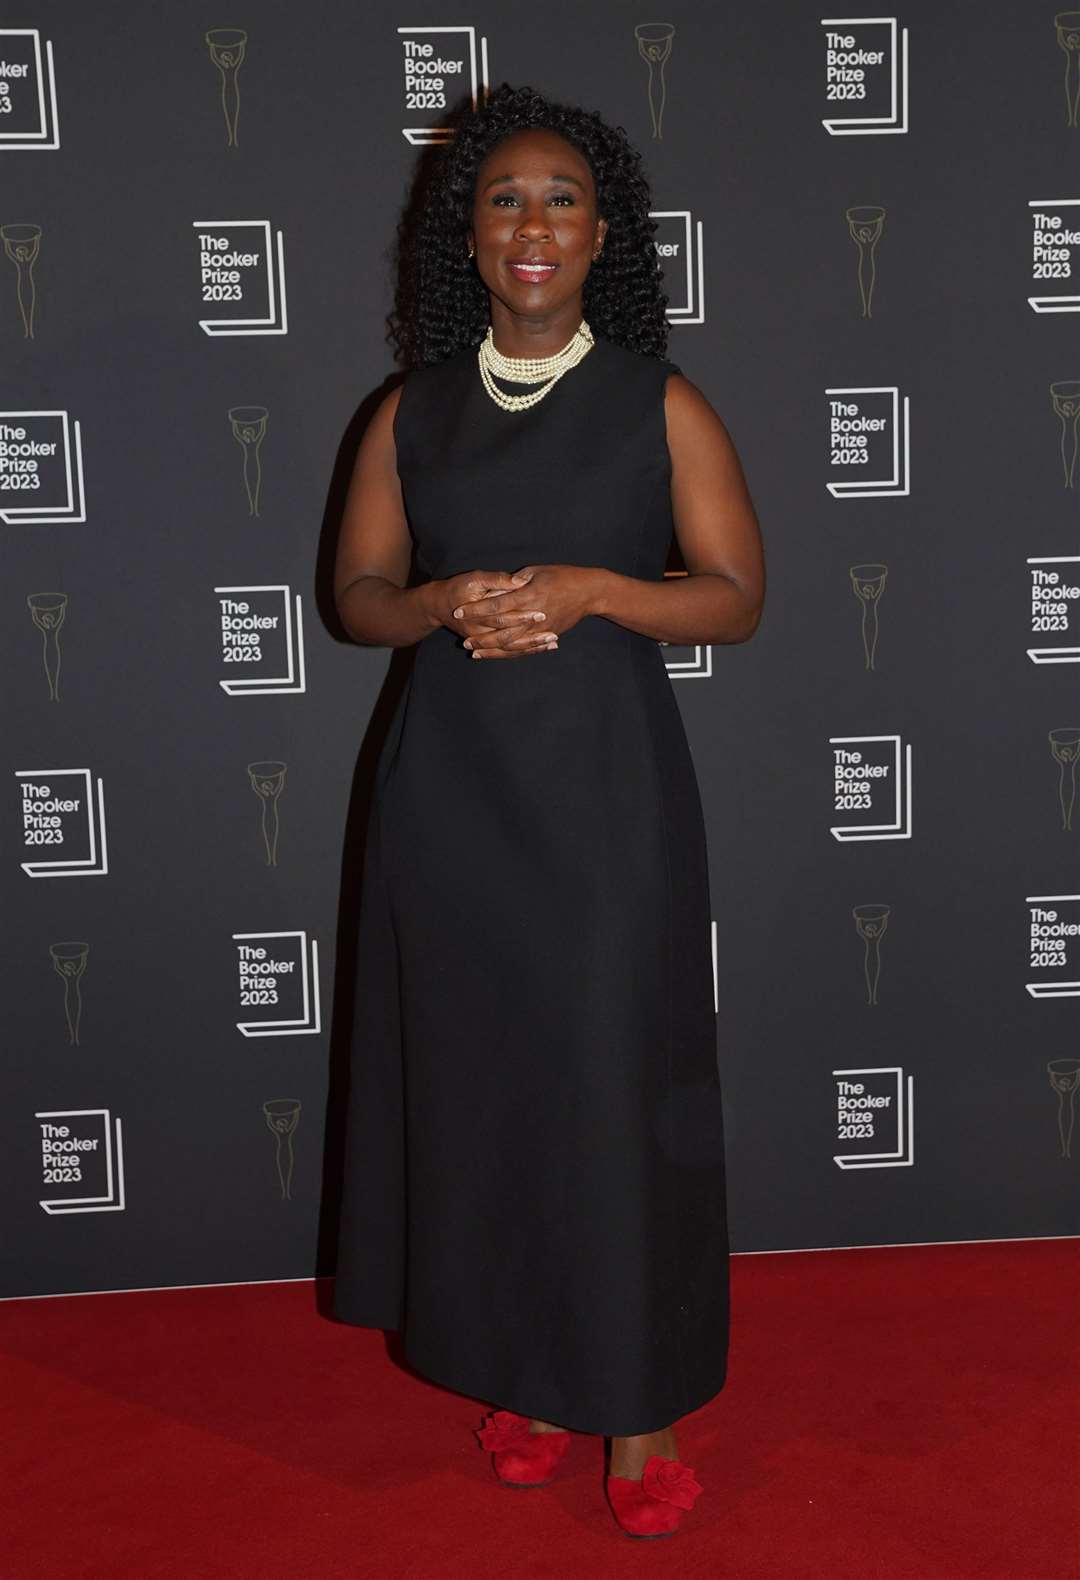 Esi Edugyan, a judge for the 2023 Booker Prize (Lucy North/PA)